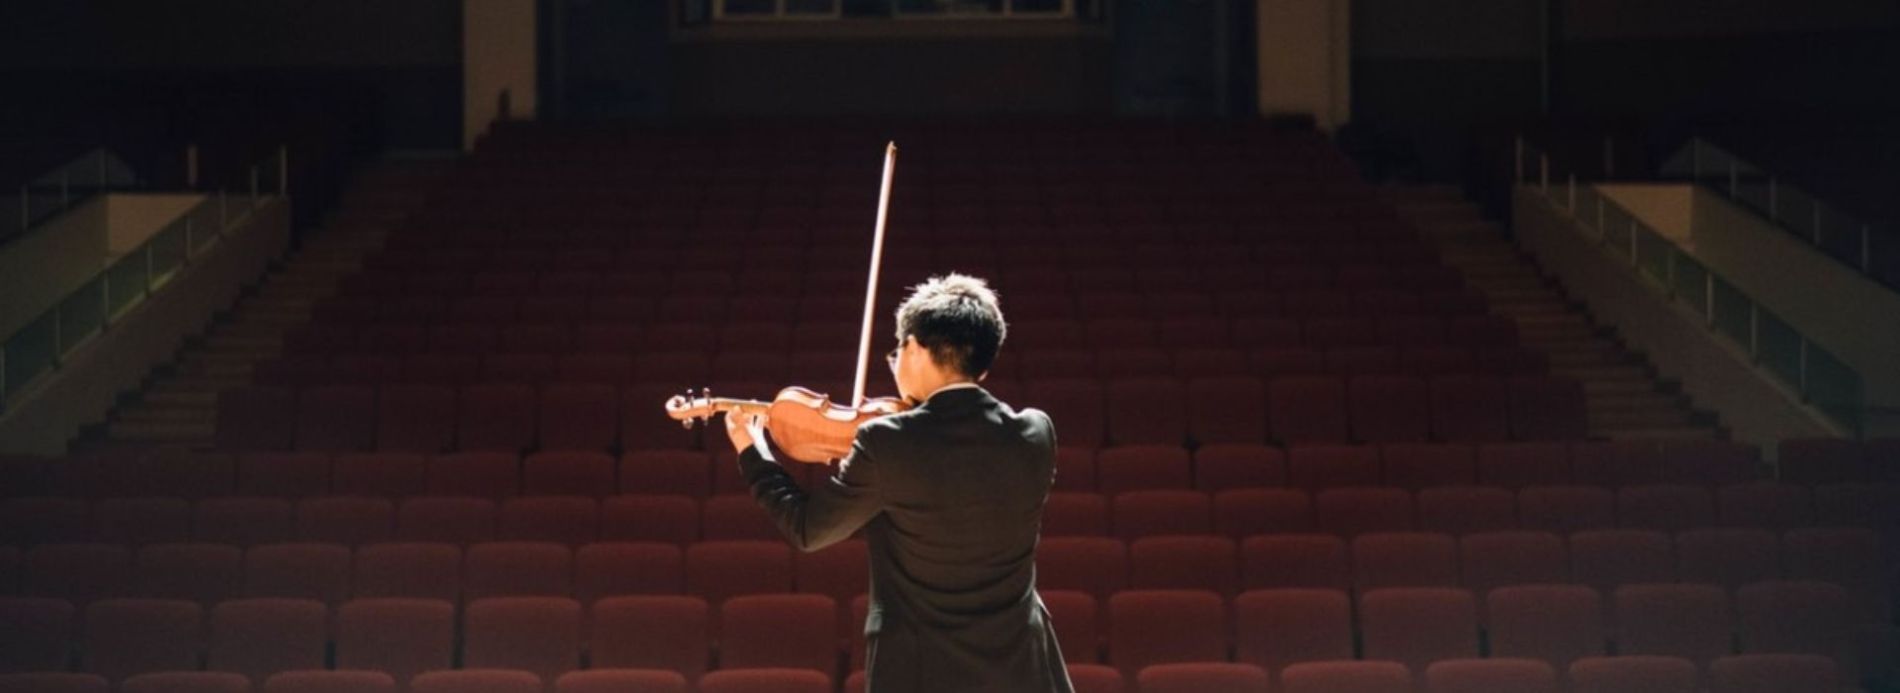 Violinist playing at a Sarasota Theatre